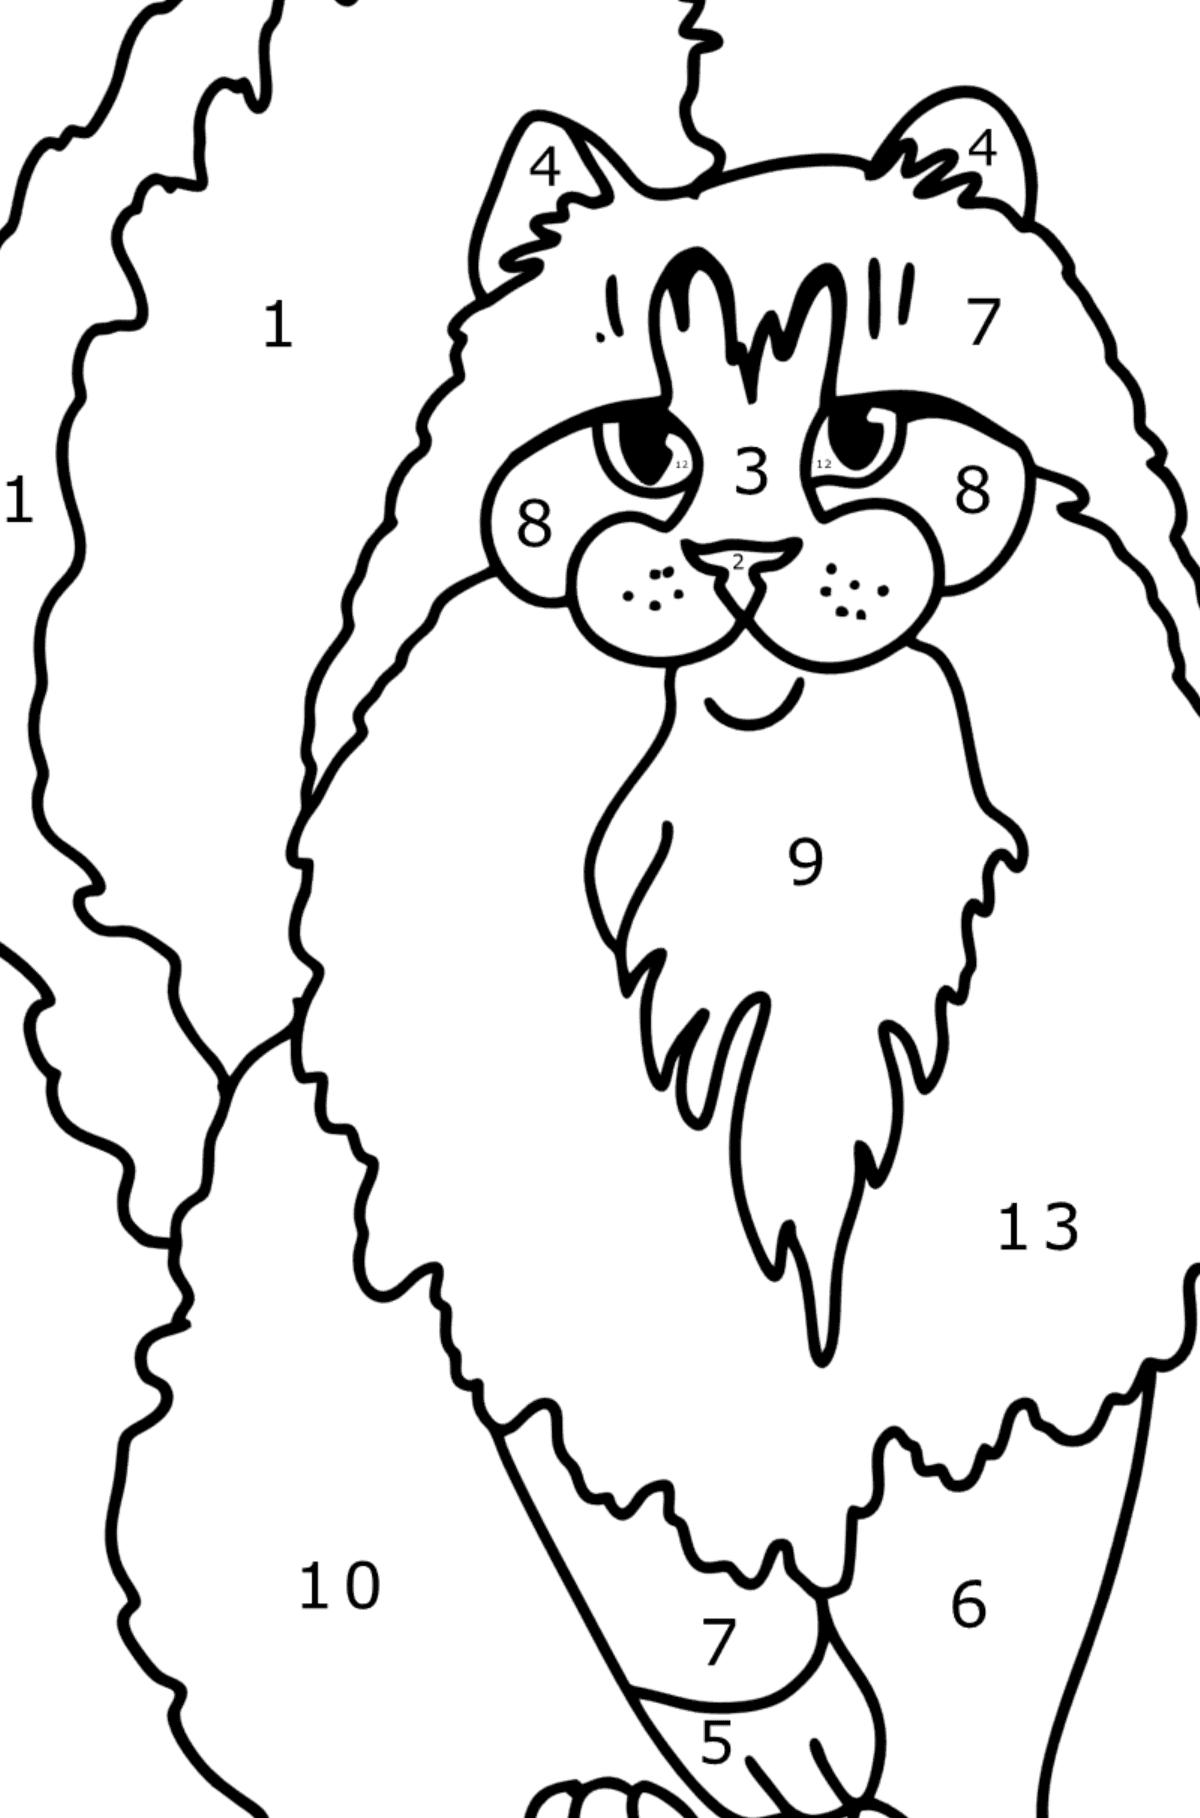 Norwegian Forest Cat coloring page - Coloring by Numbers for Kids